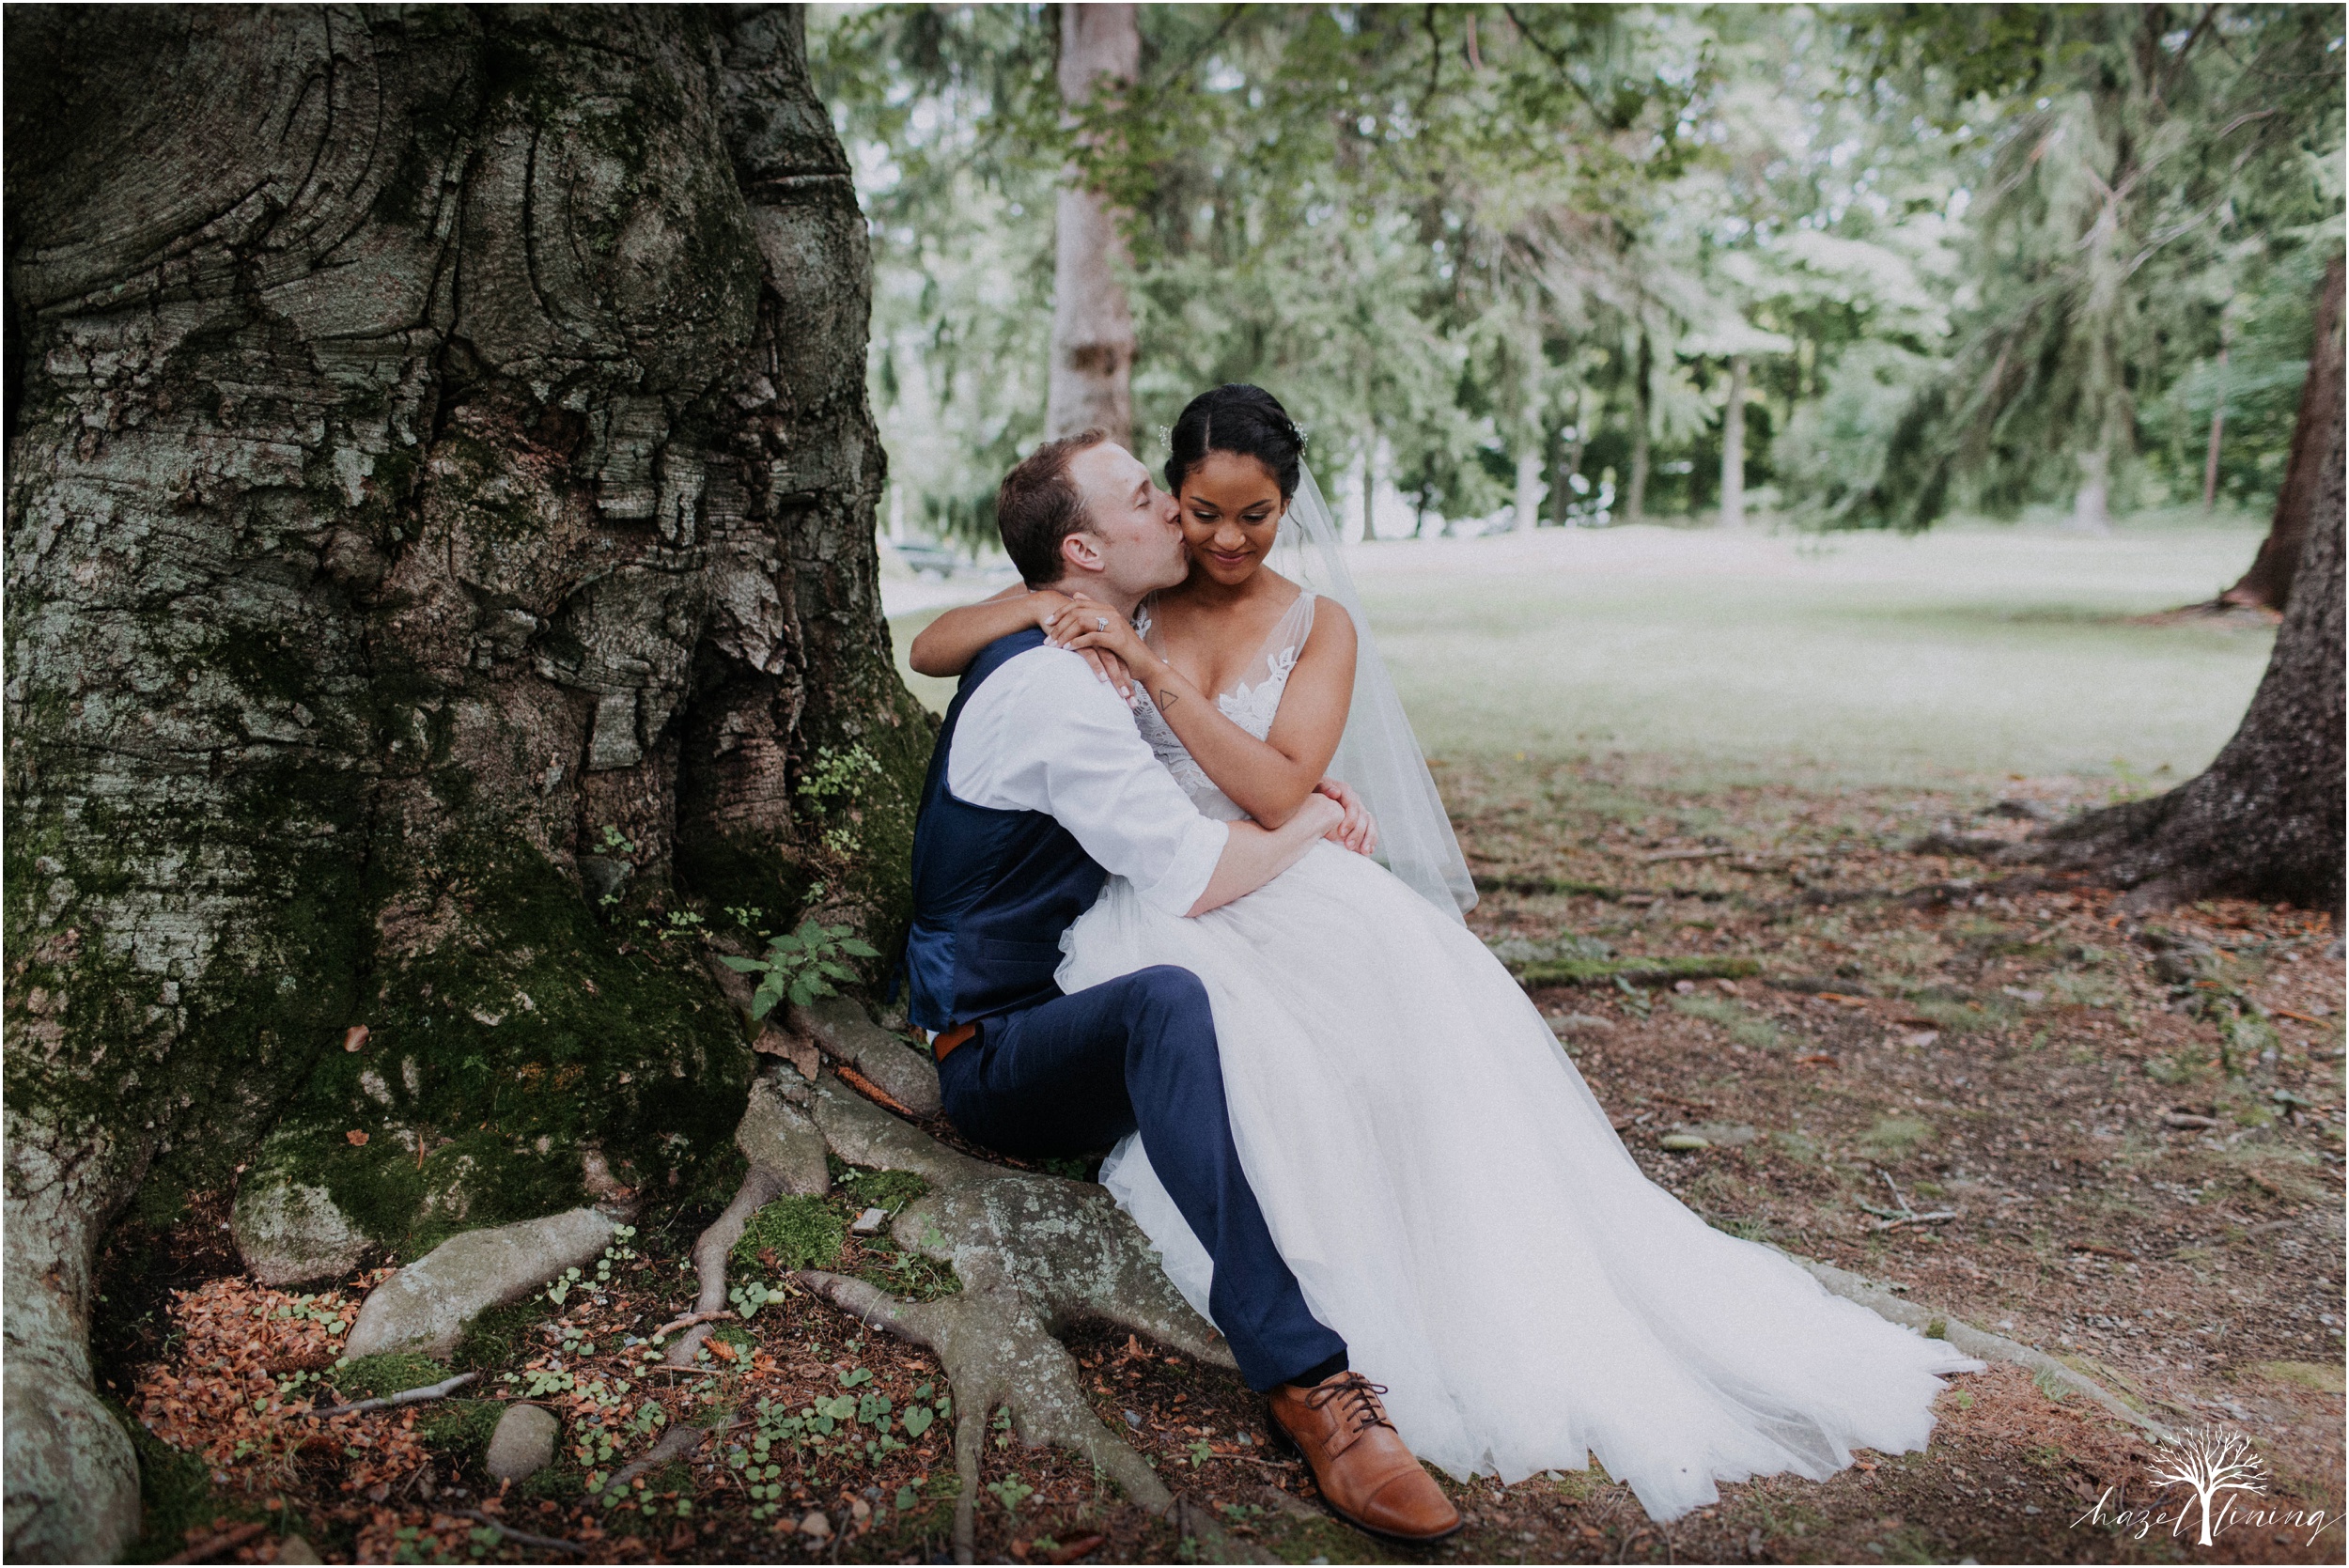 hazel-lining-photography-destination--elopement-wedding-engagement-photography-year-in-review_0015.jpg